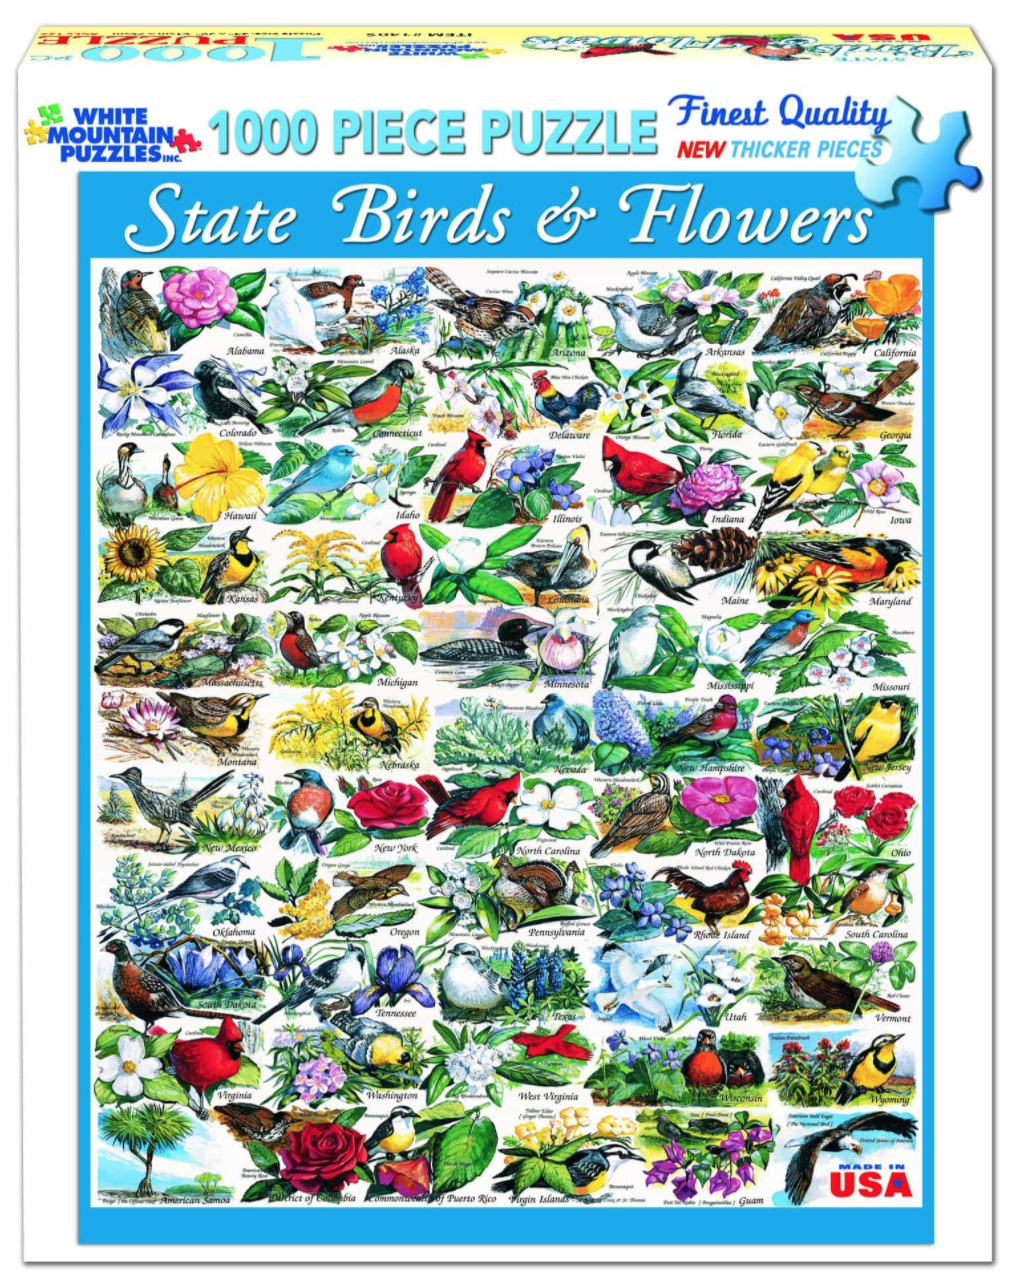 State Birds & Flowers 1000 Piece Jigsaw Puzzle by White Mountain Puzzle